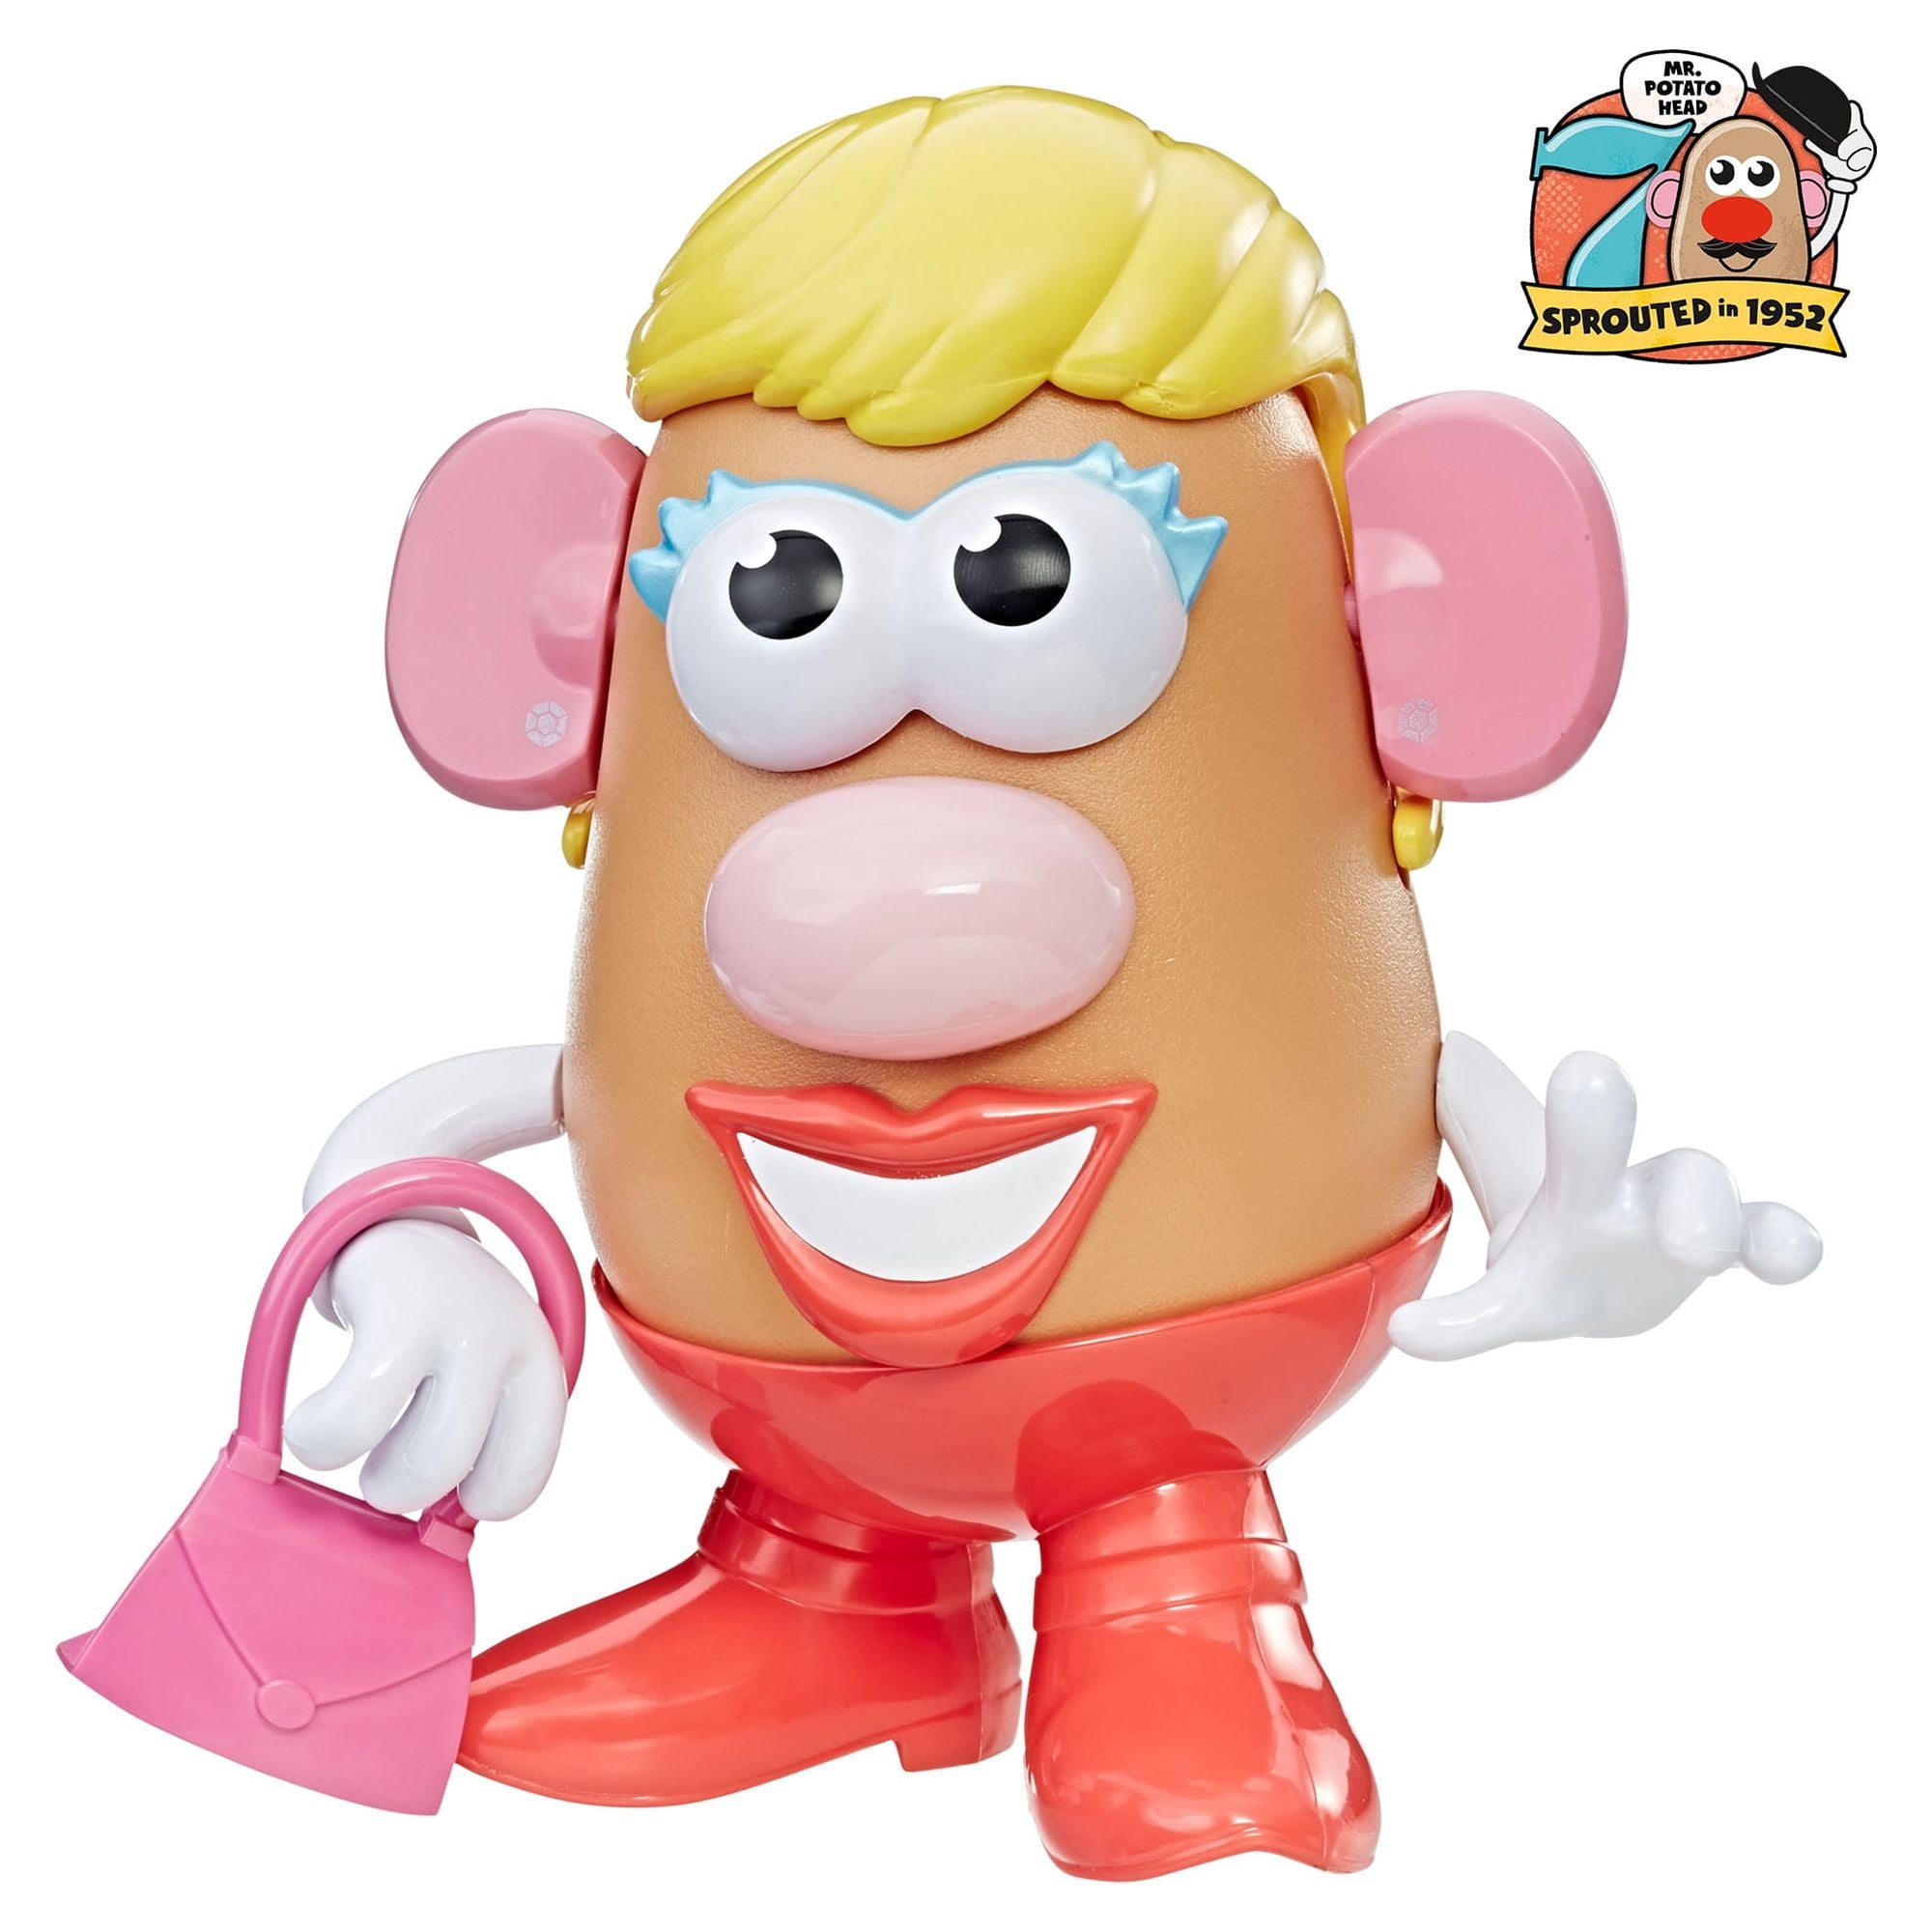 Toy Story Mr Potato Head And Accessories for Sale in Colorado